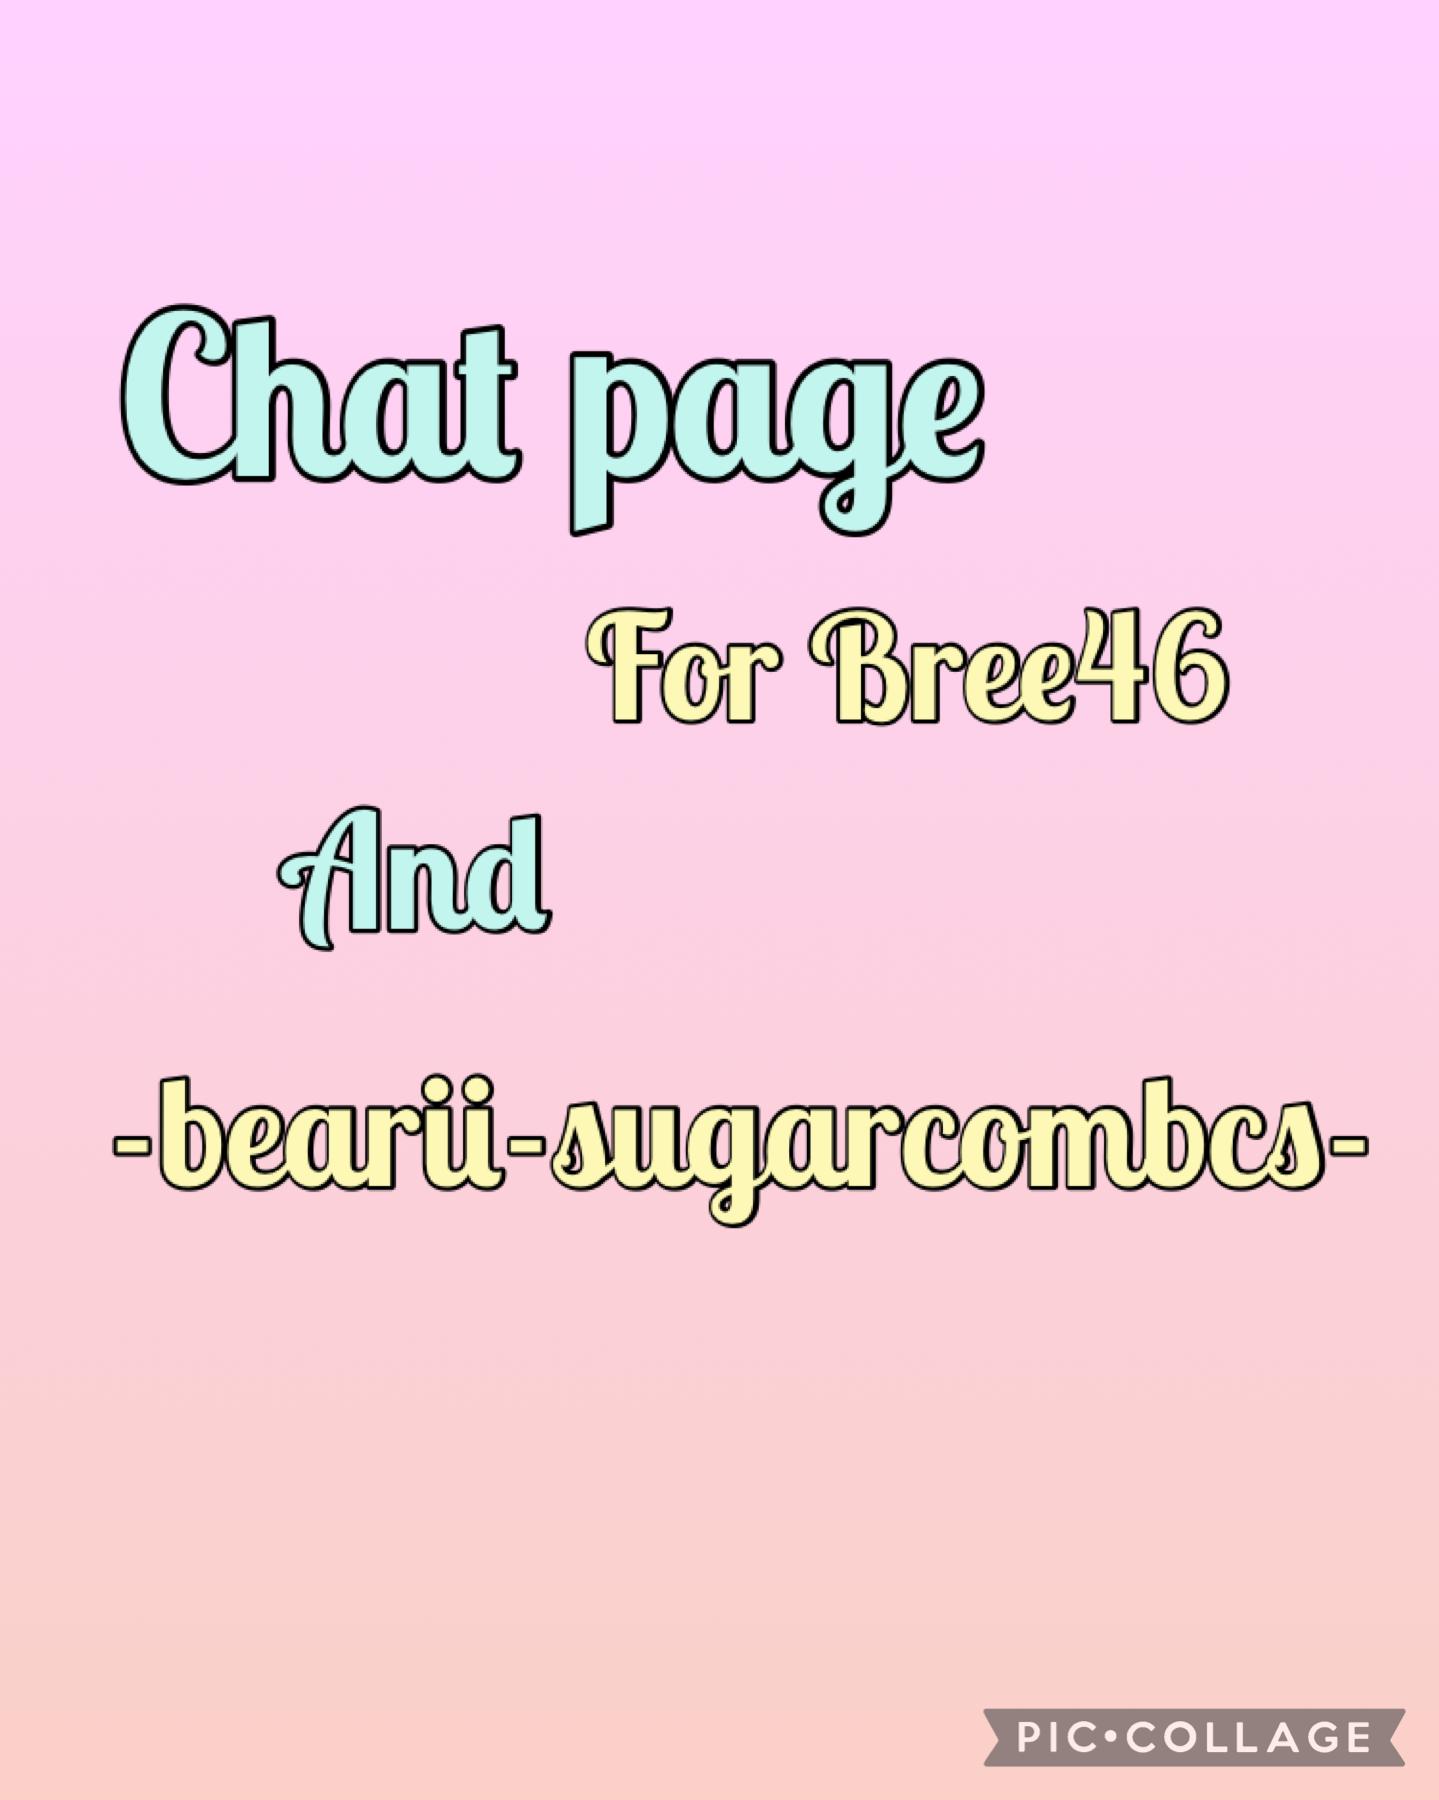 20.1.22 Chat page with -bearii-sugarcombcs-